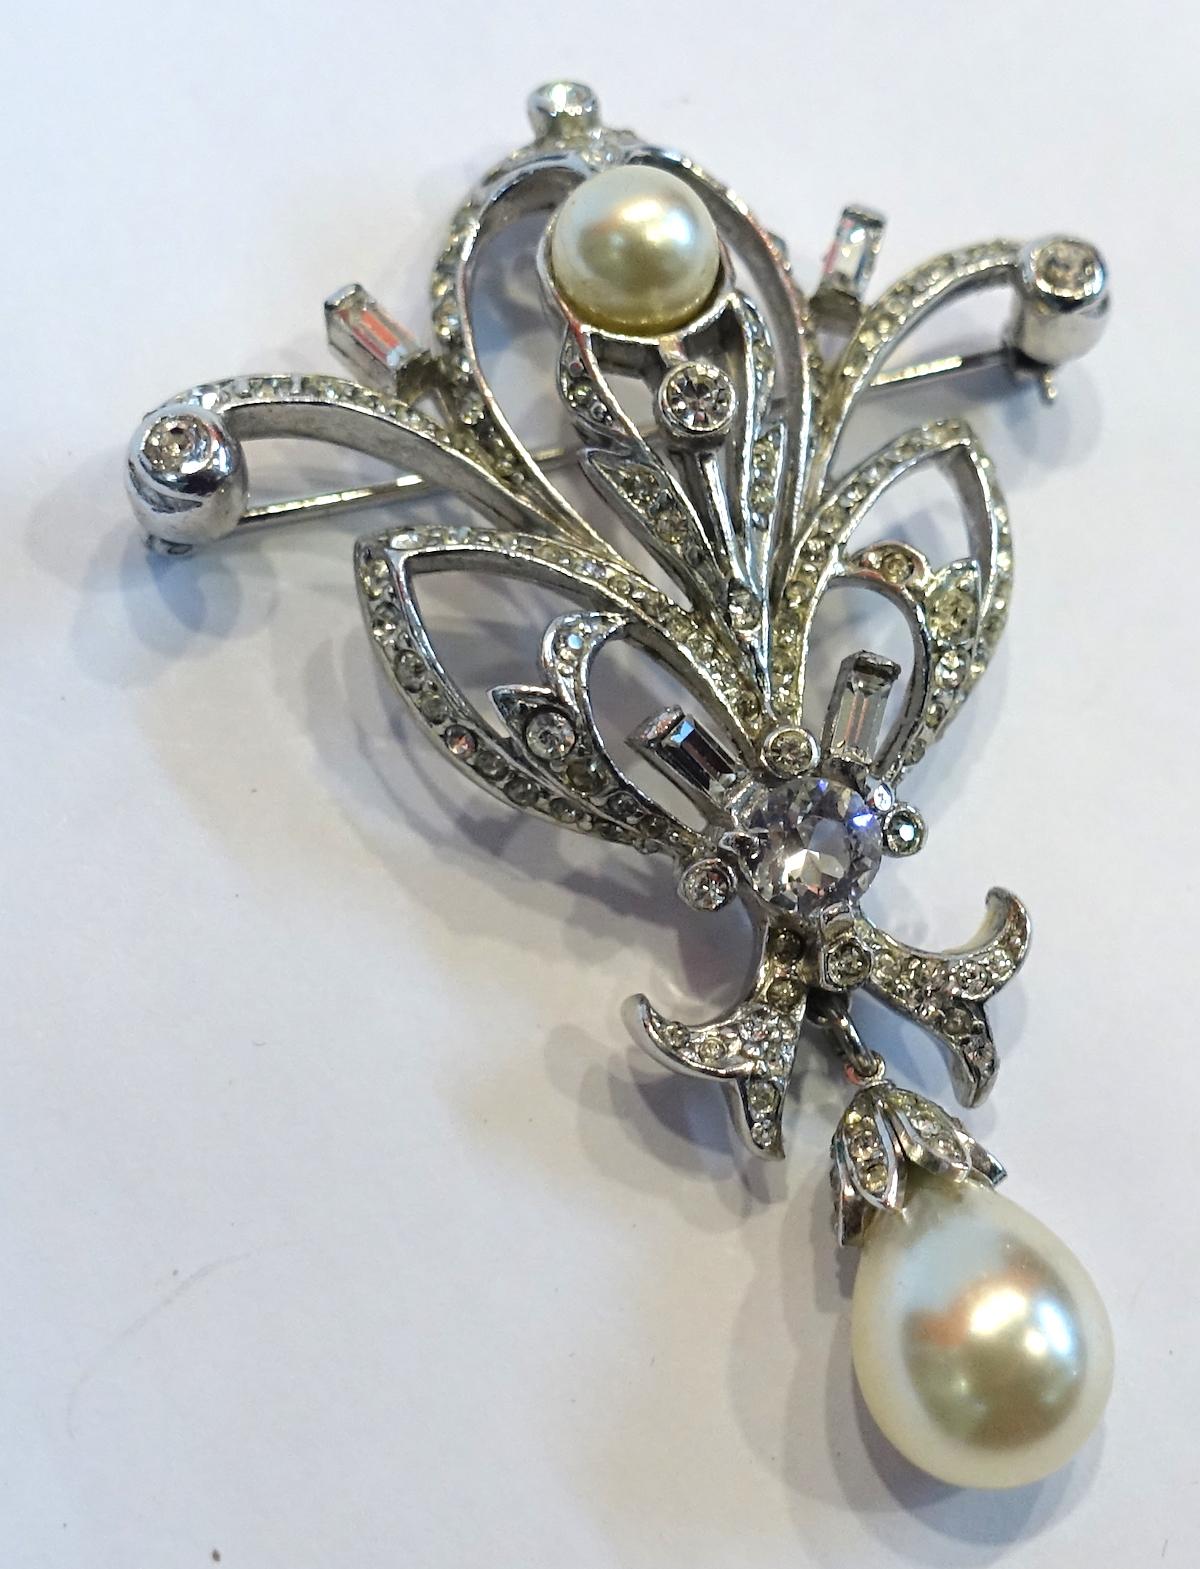 This beautiful vintage signed Reja brooch has an intricate design with faux pearls & clear crystals in a rhodium silver tone setting.  The brooch measures 2-3/4” x 1-7/8” and signed “Reja”. It is in excellent condition.